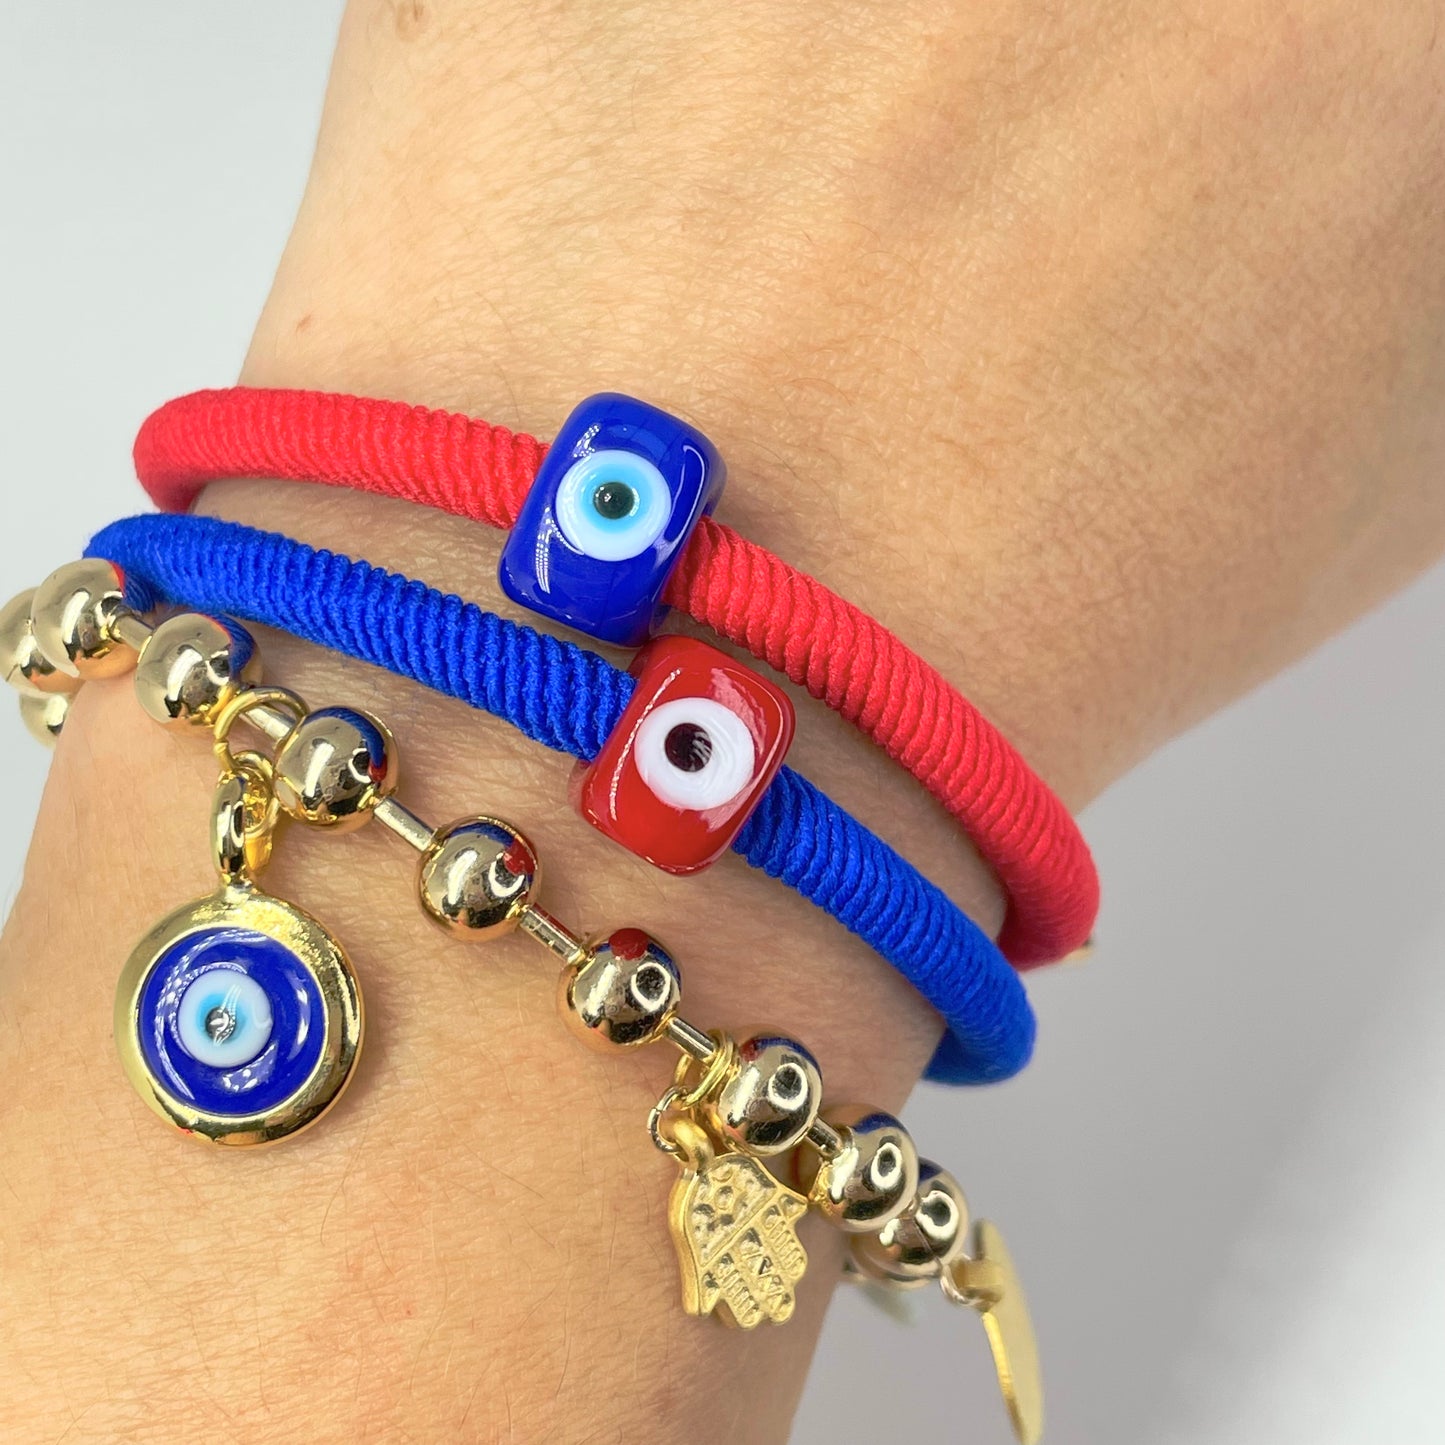 Murano Lucky Bracelet ( Royal Blue with Red Bead )